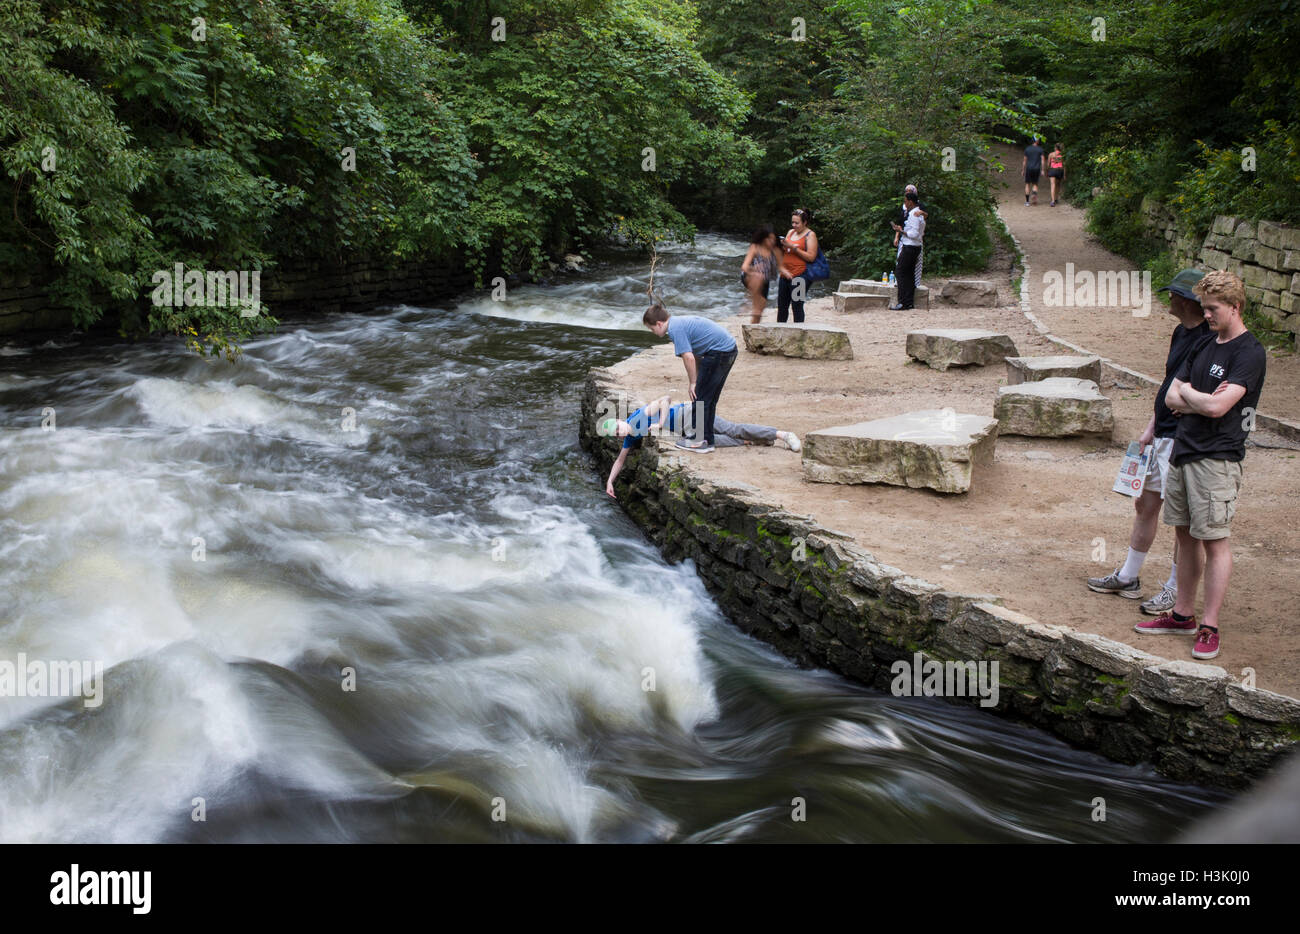 People look at the rushing current of the Minnehaha River near Minnehaha Falls in Minnesota Stock Photo